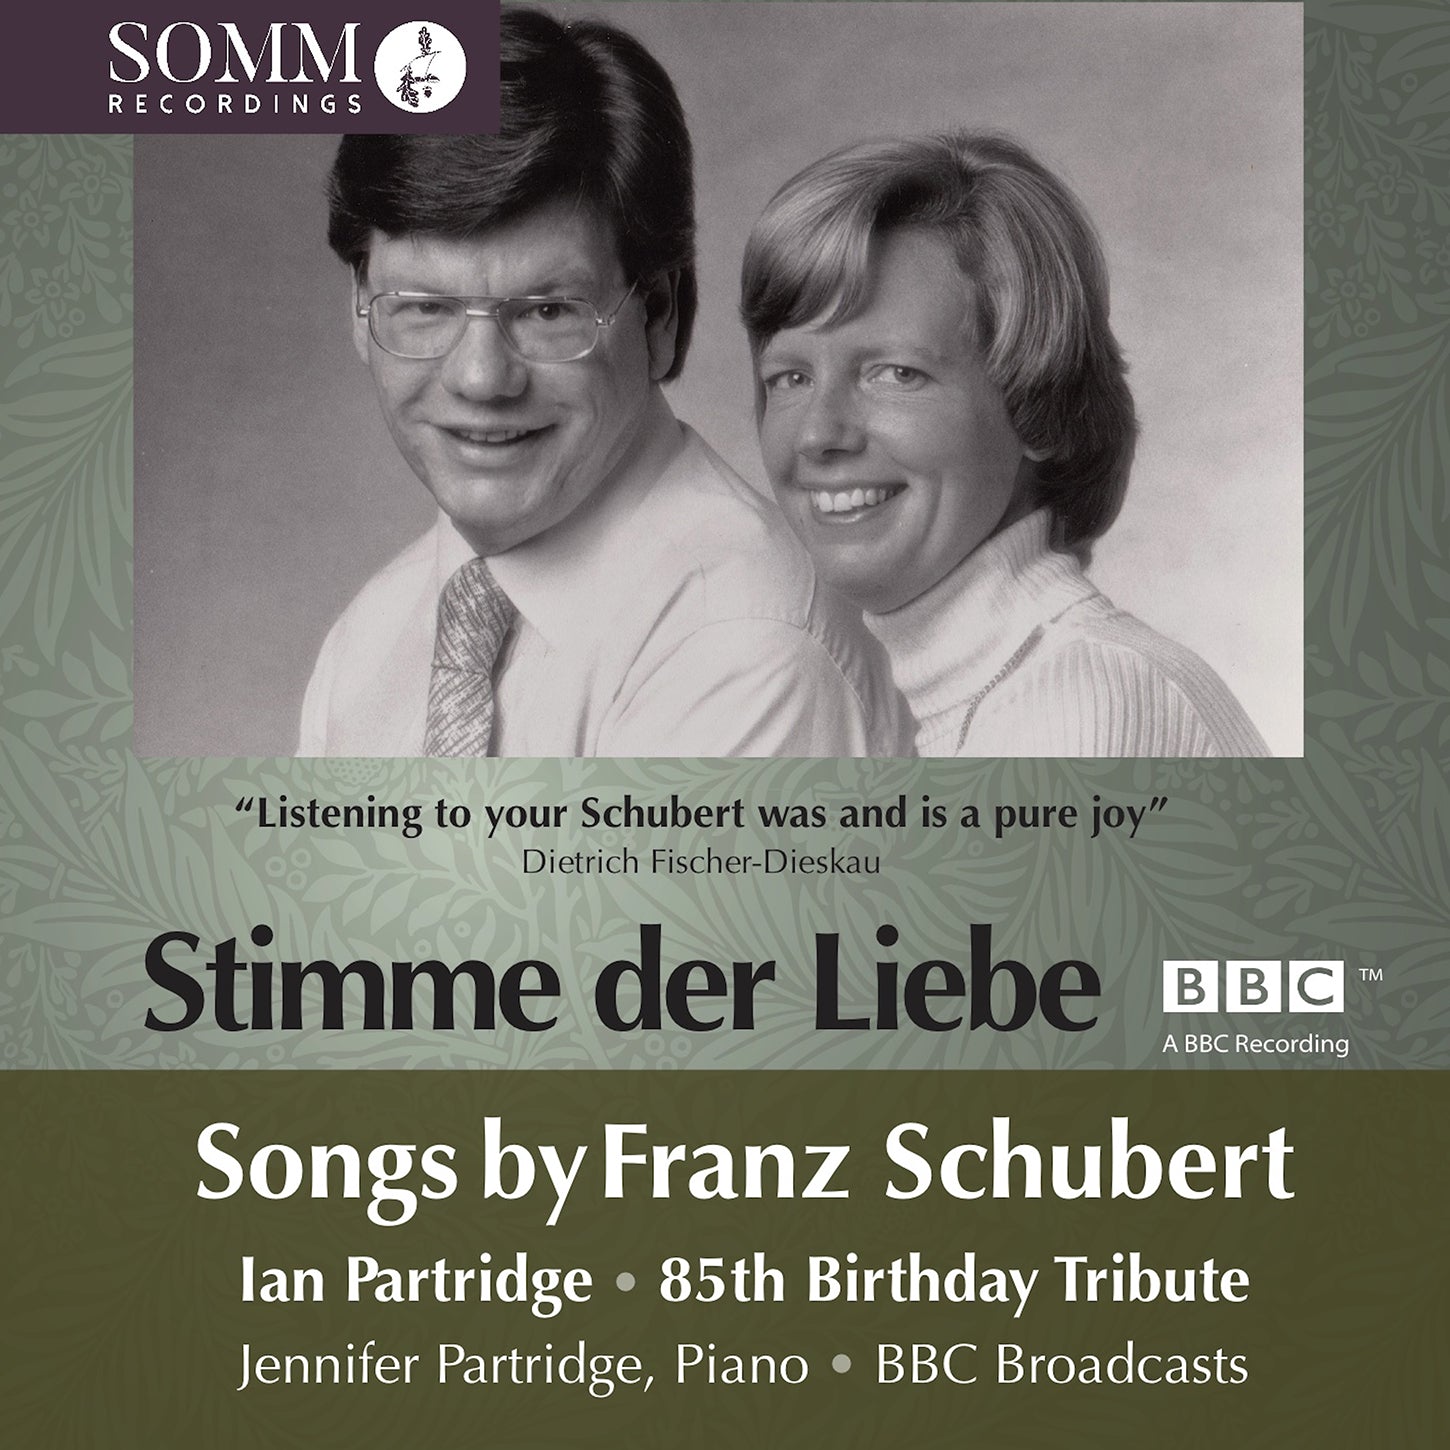 Ian Partridge 85th Birthday Tribute - Stimme der Liebe (The Voice of Love)